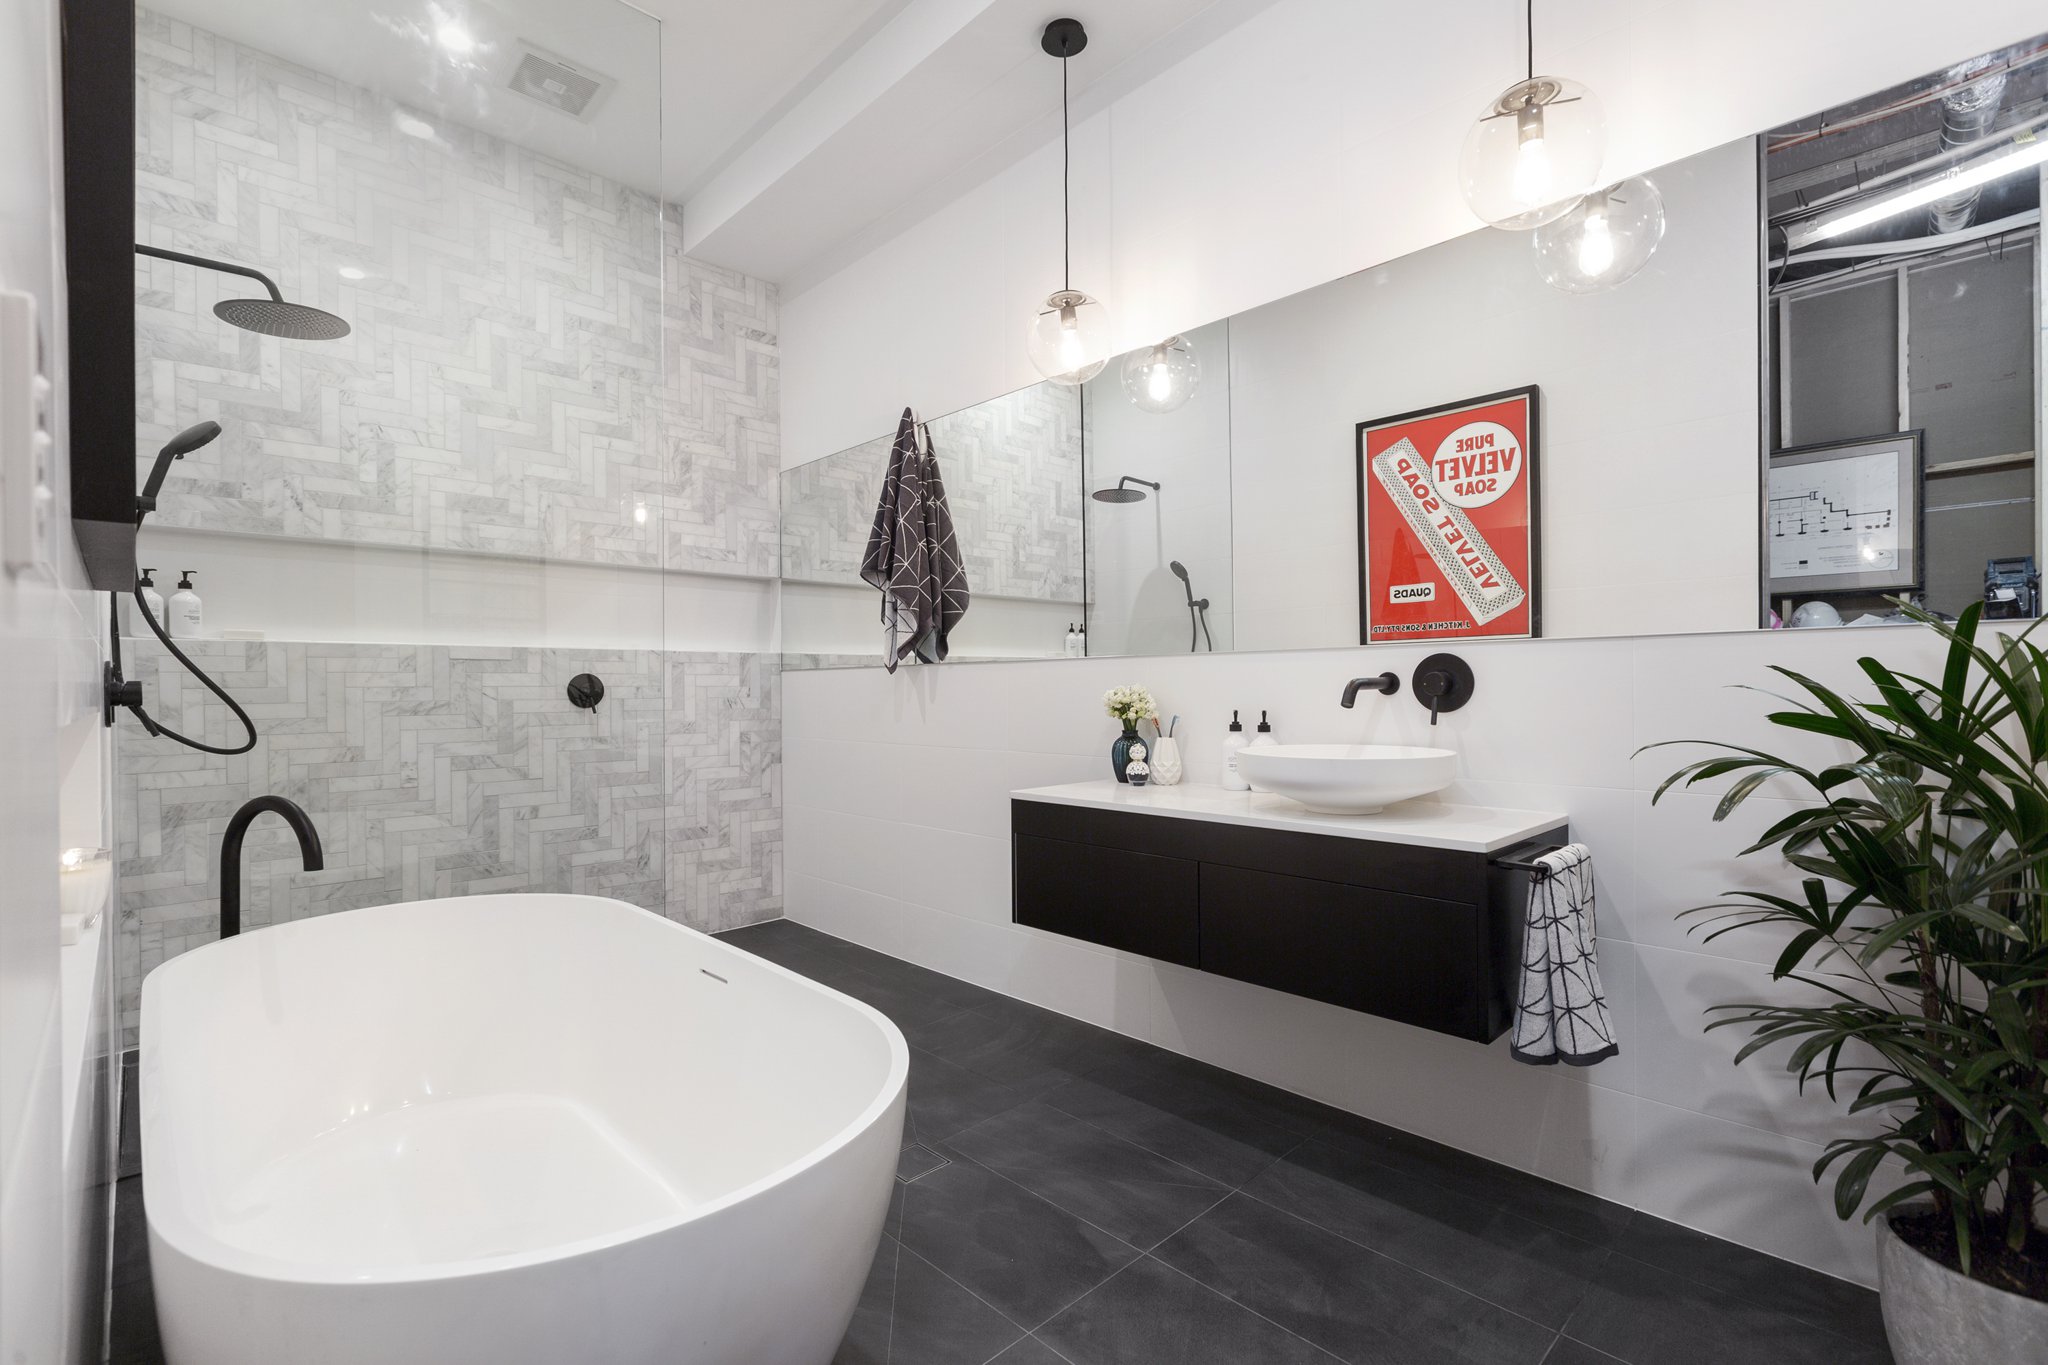 Work which the bathroom renovators can perform